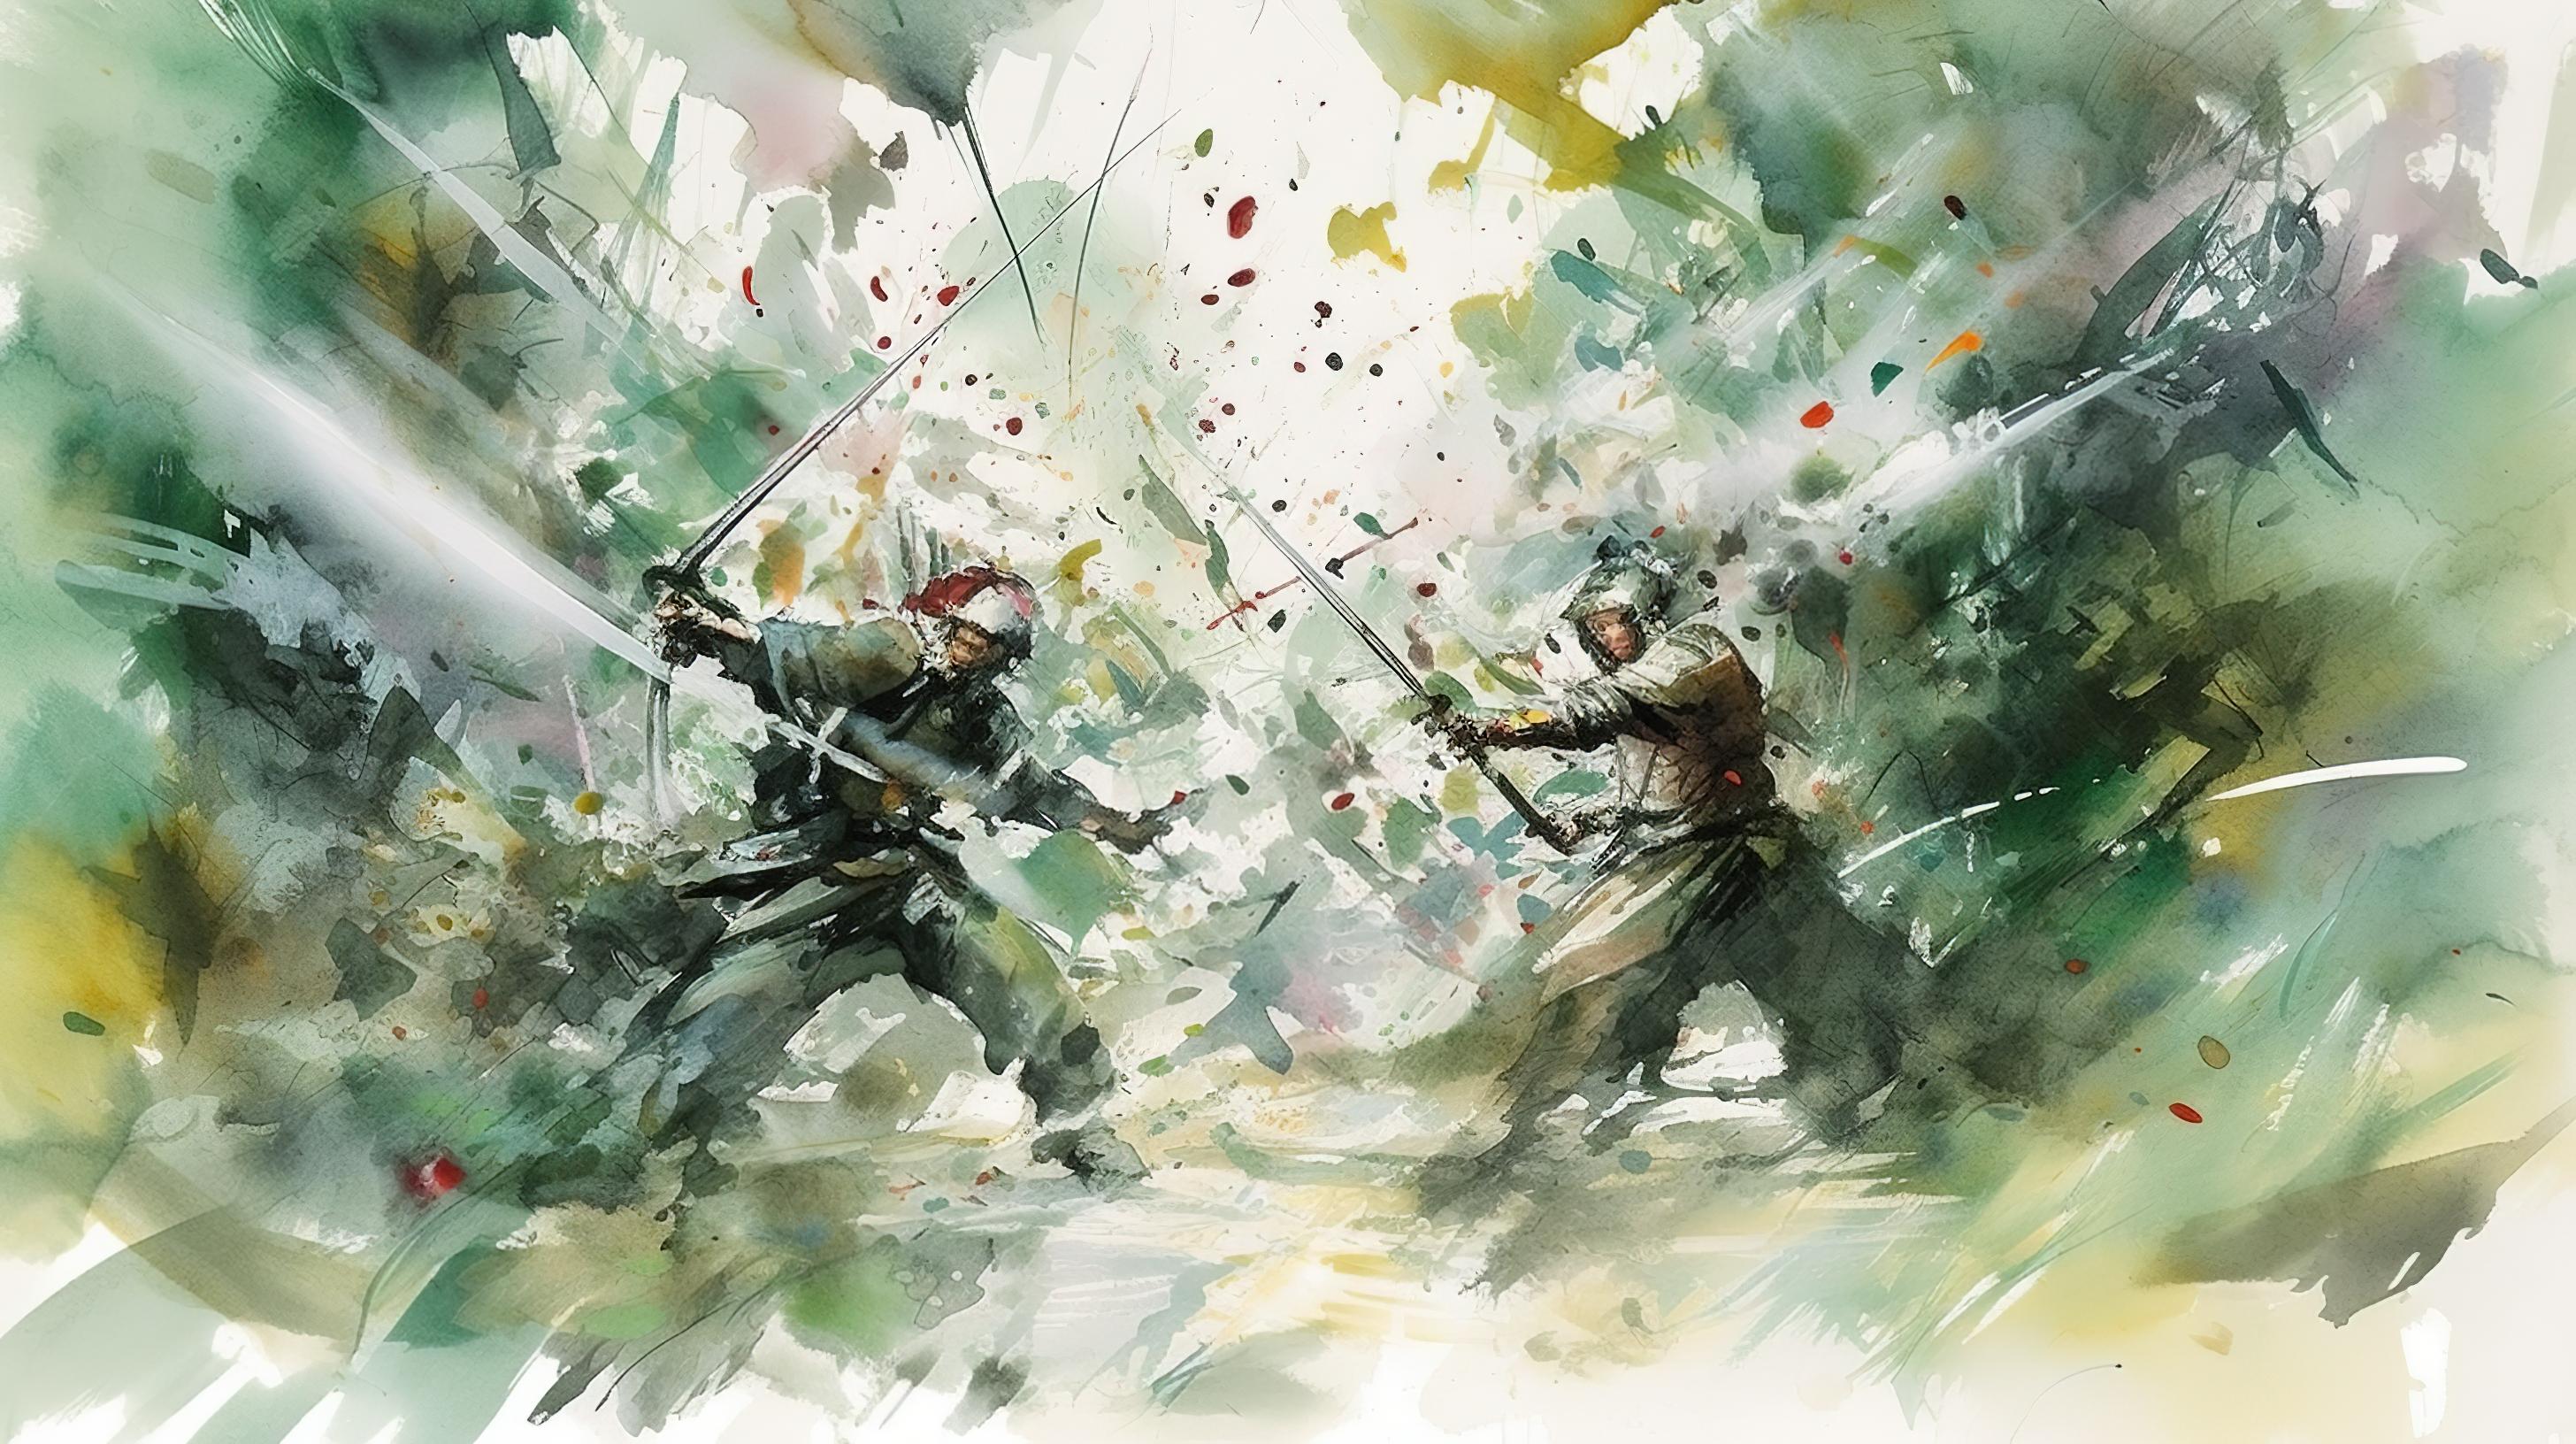 action_film_of_wo_swordsmen_fighting_by_wu_guanzhong_by_william-gigapixel-scale-2_00x_18.jpg